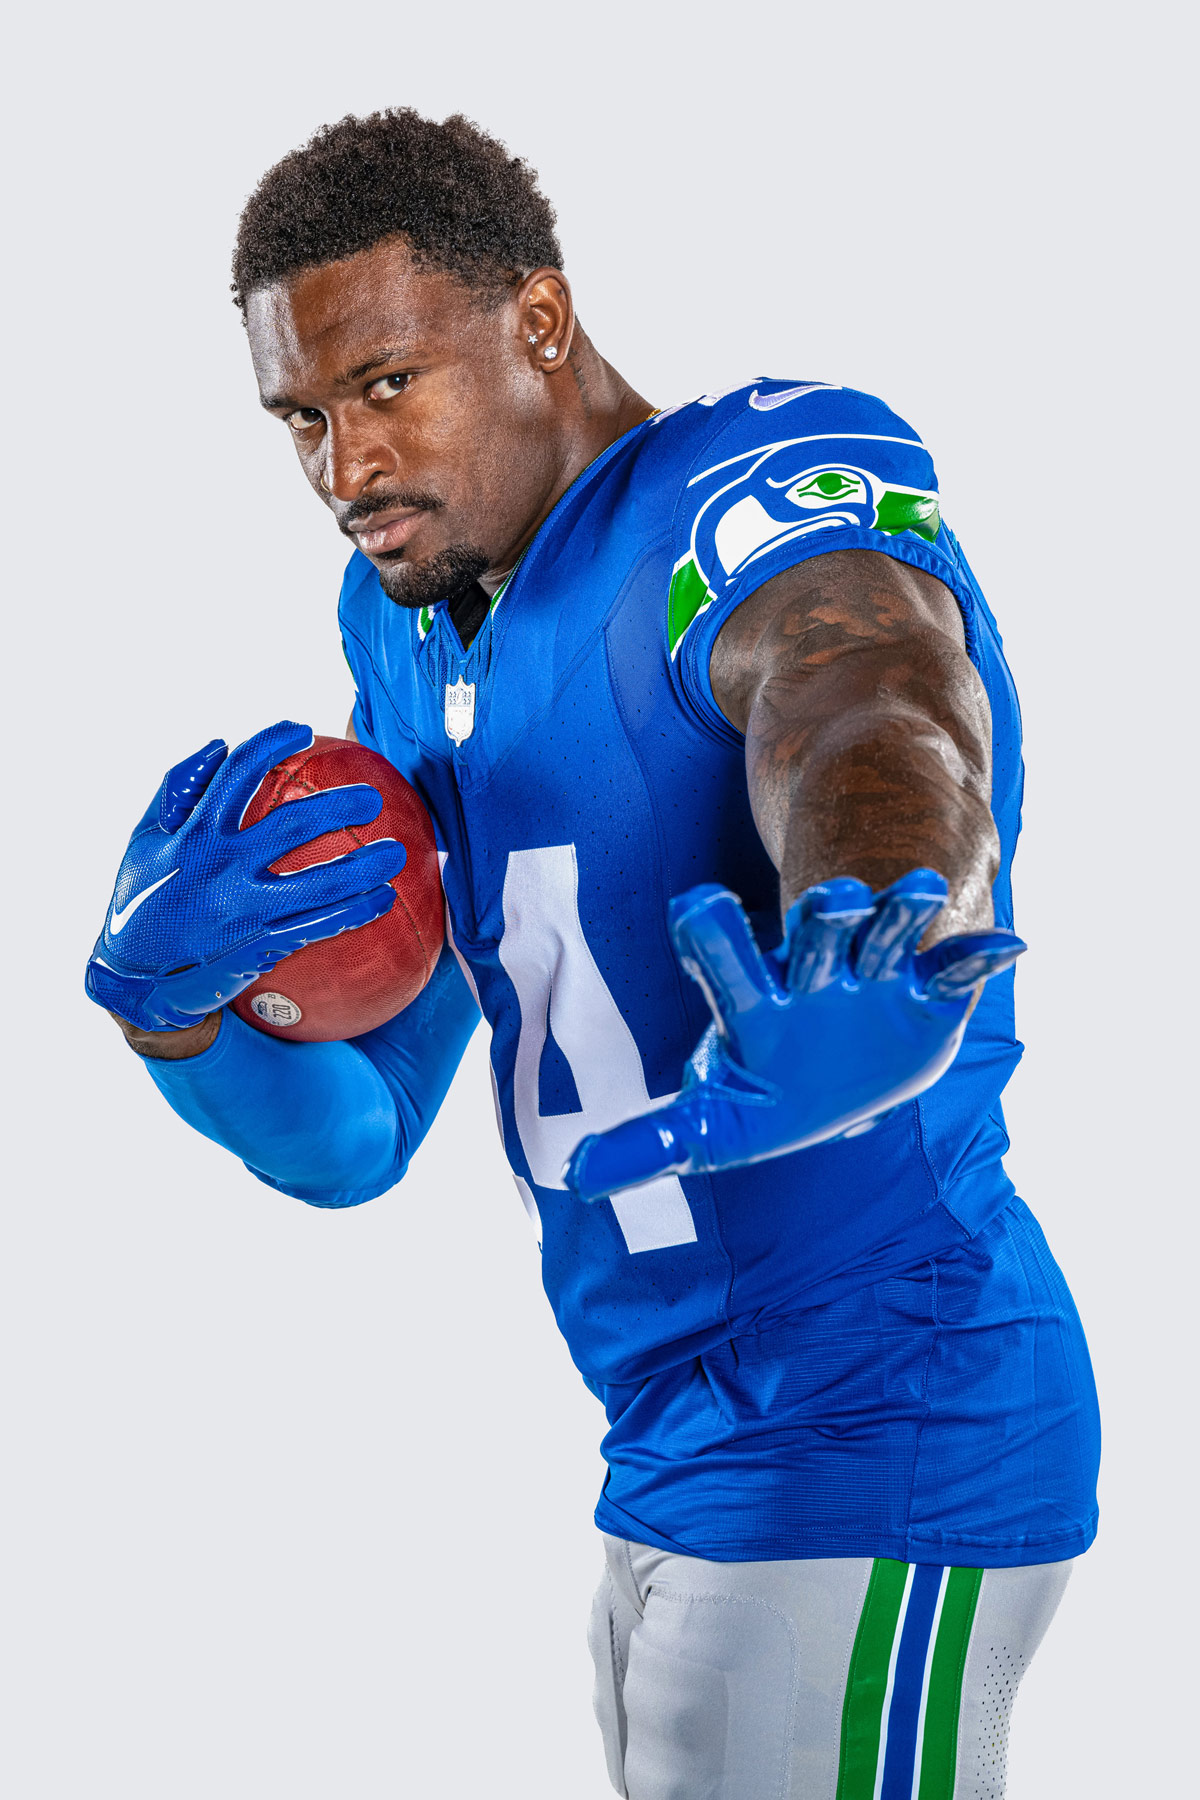 Seahawks New Uniforms: Pictures Of Nike's Changes 